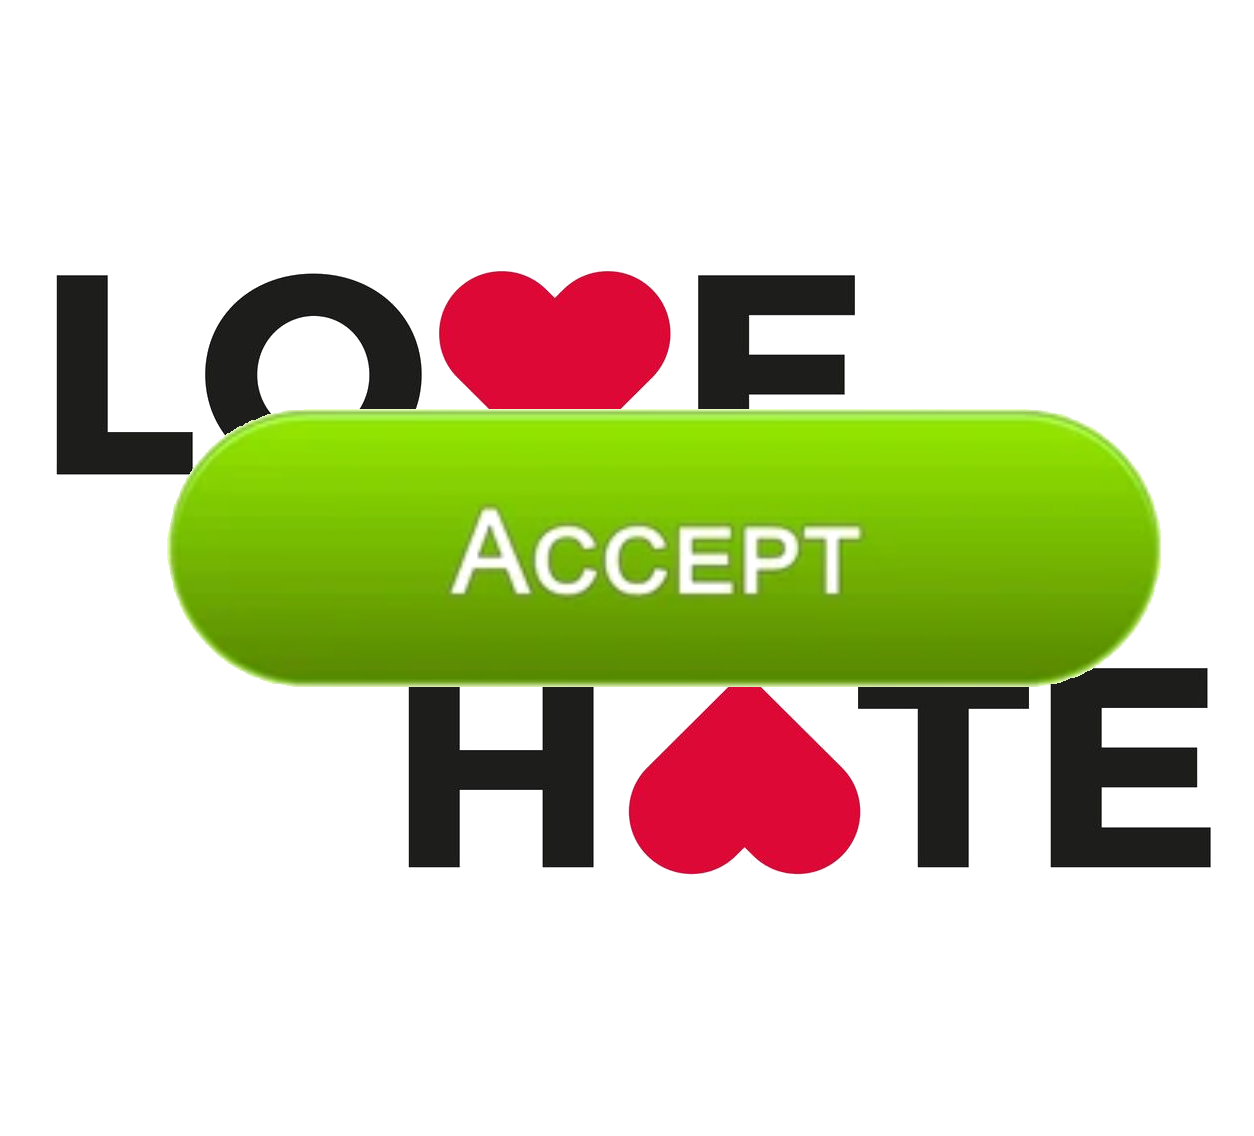 Accept = Hate + Love